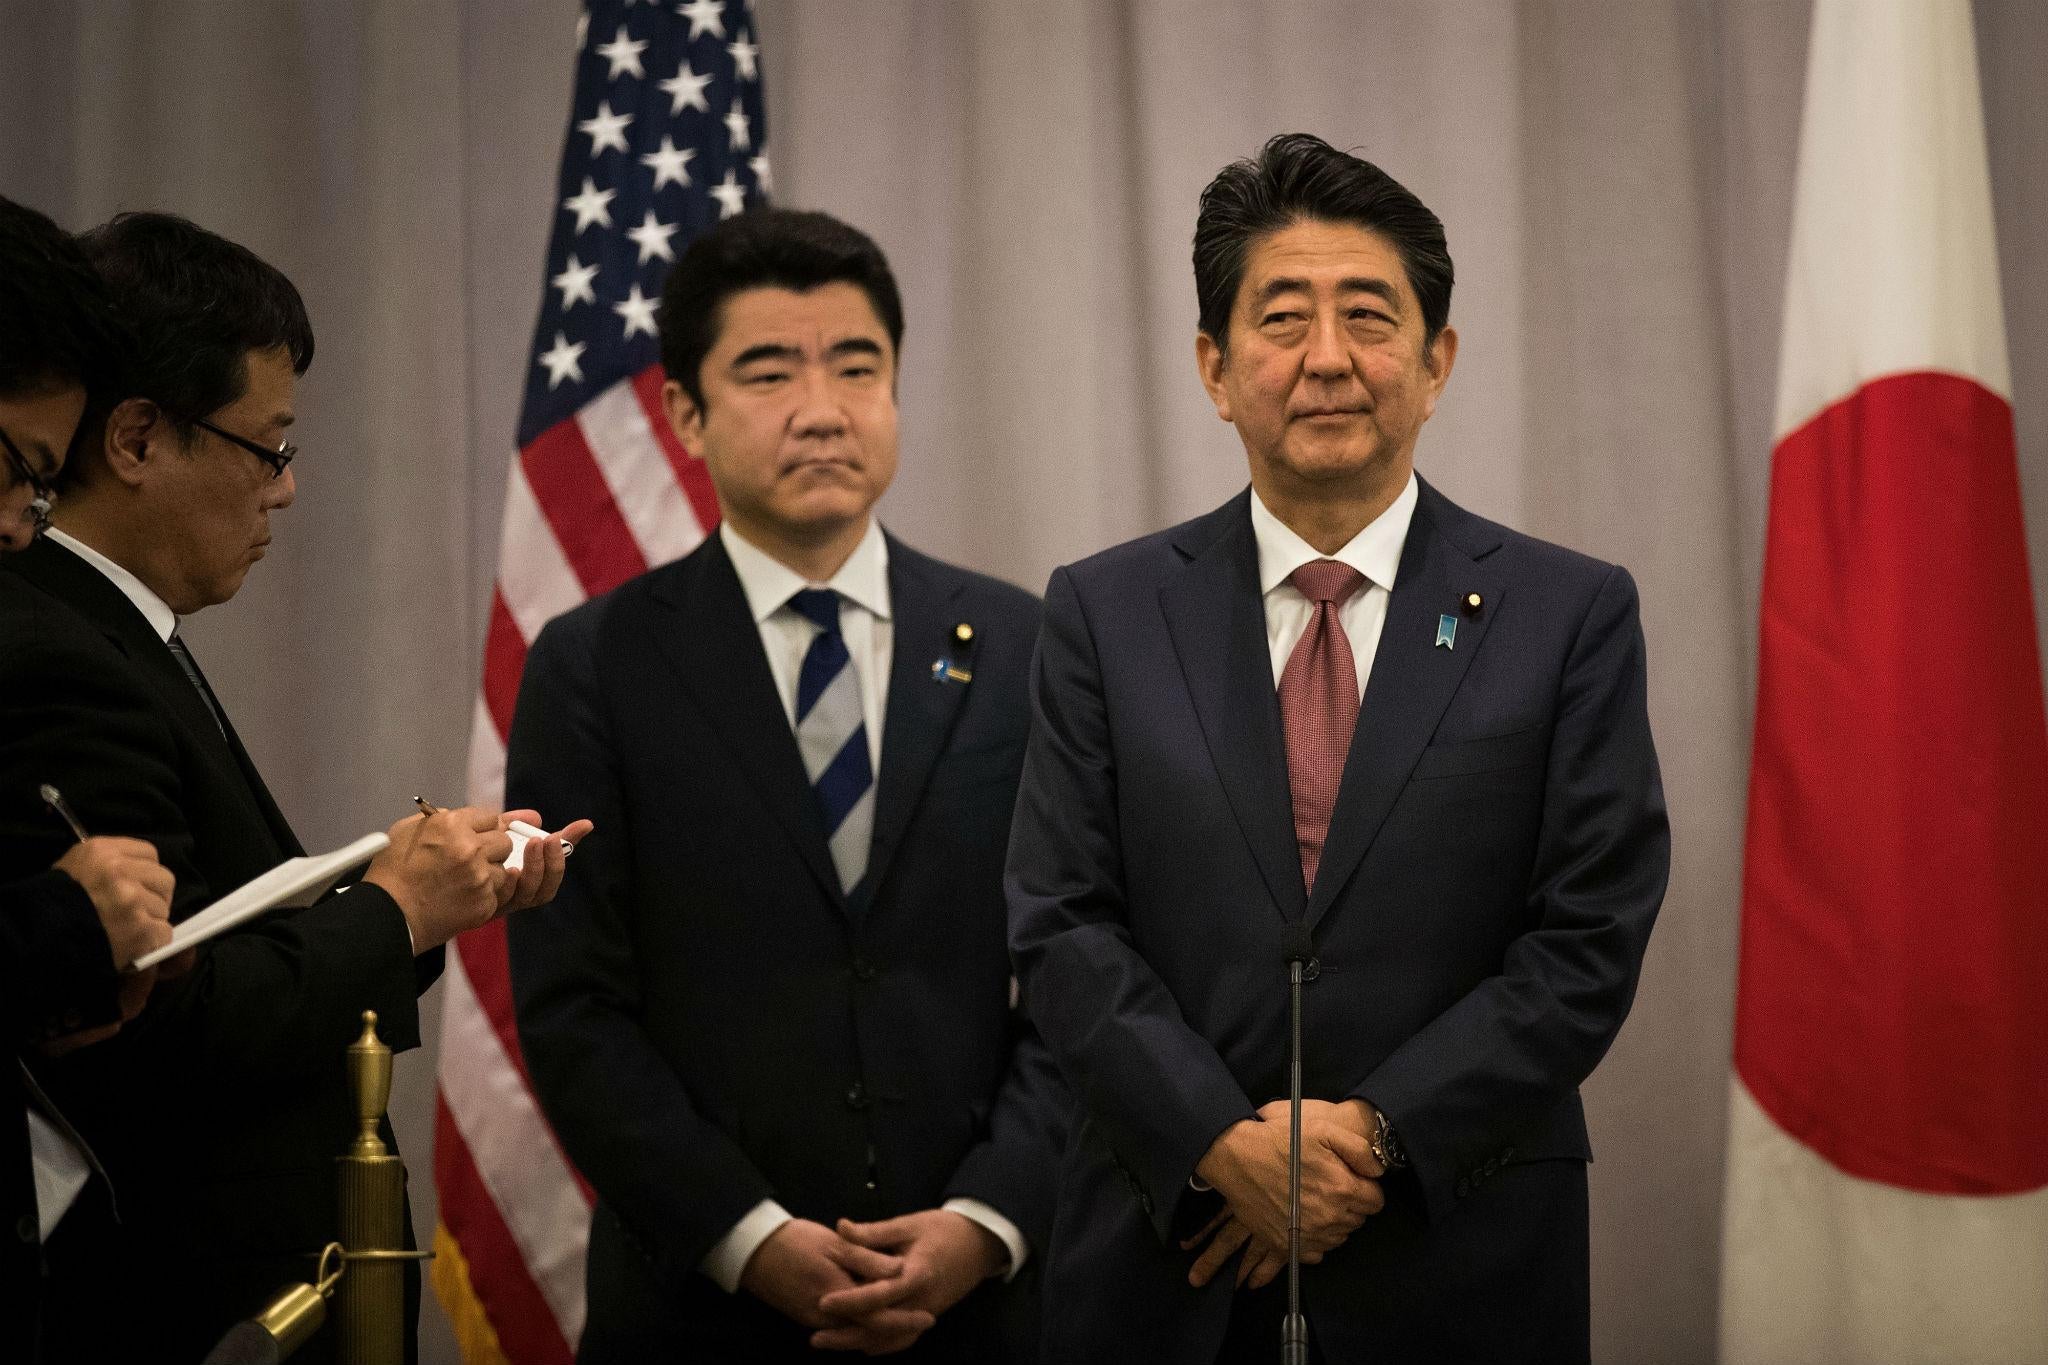 Japanese Prime Minister Shinzo Abe (right) speaks to members of the press after meeting Donald Trump last night